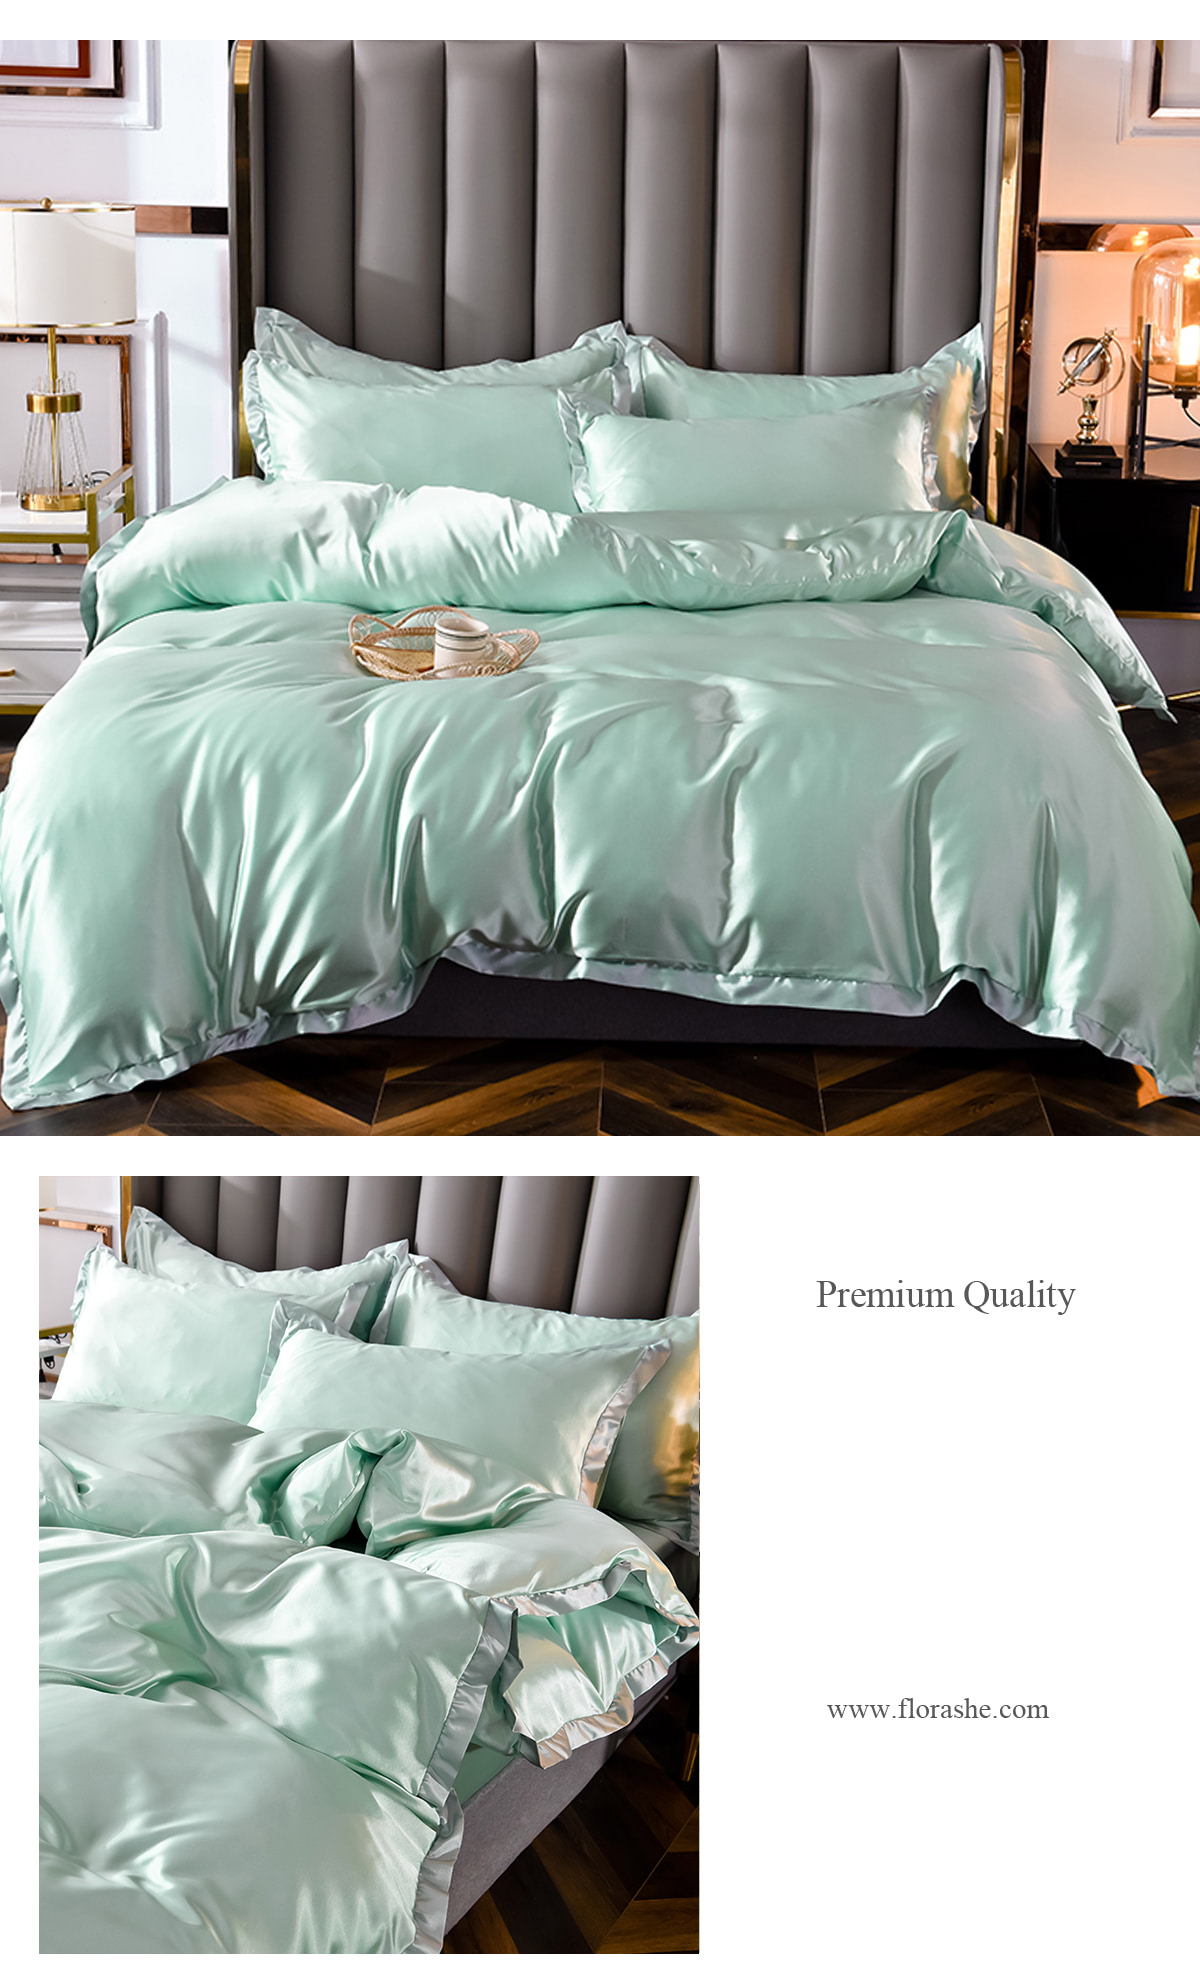 Fresh-and-Soft-Comfortable-Satin-Bed-Cover-Sheet-Set20.jpg